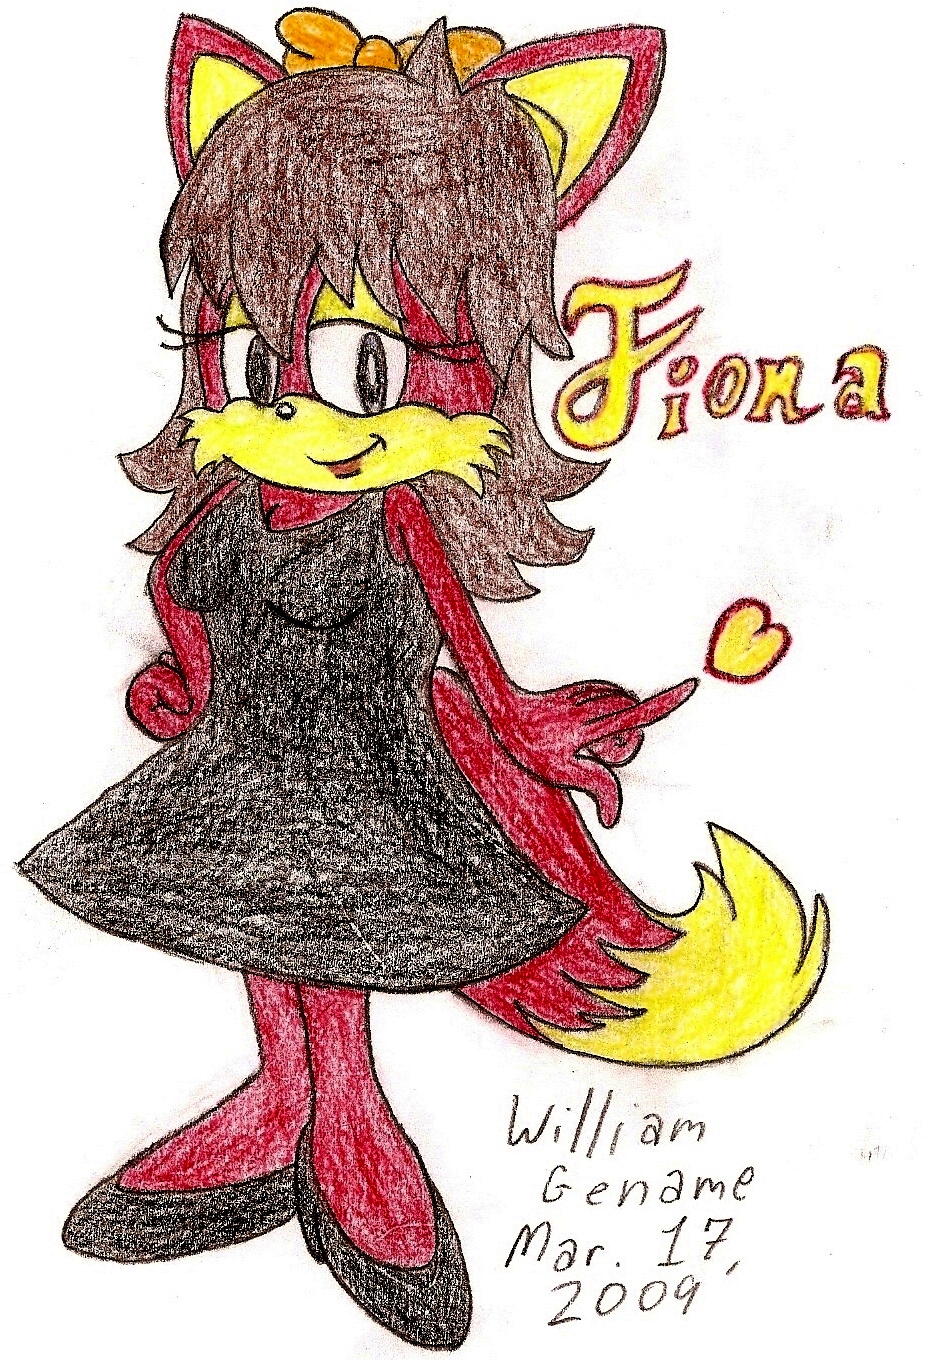 Fiona Fox in Black by germanname